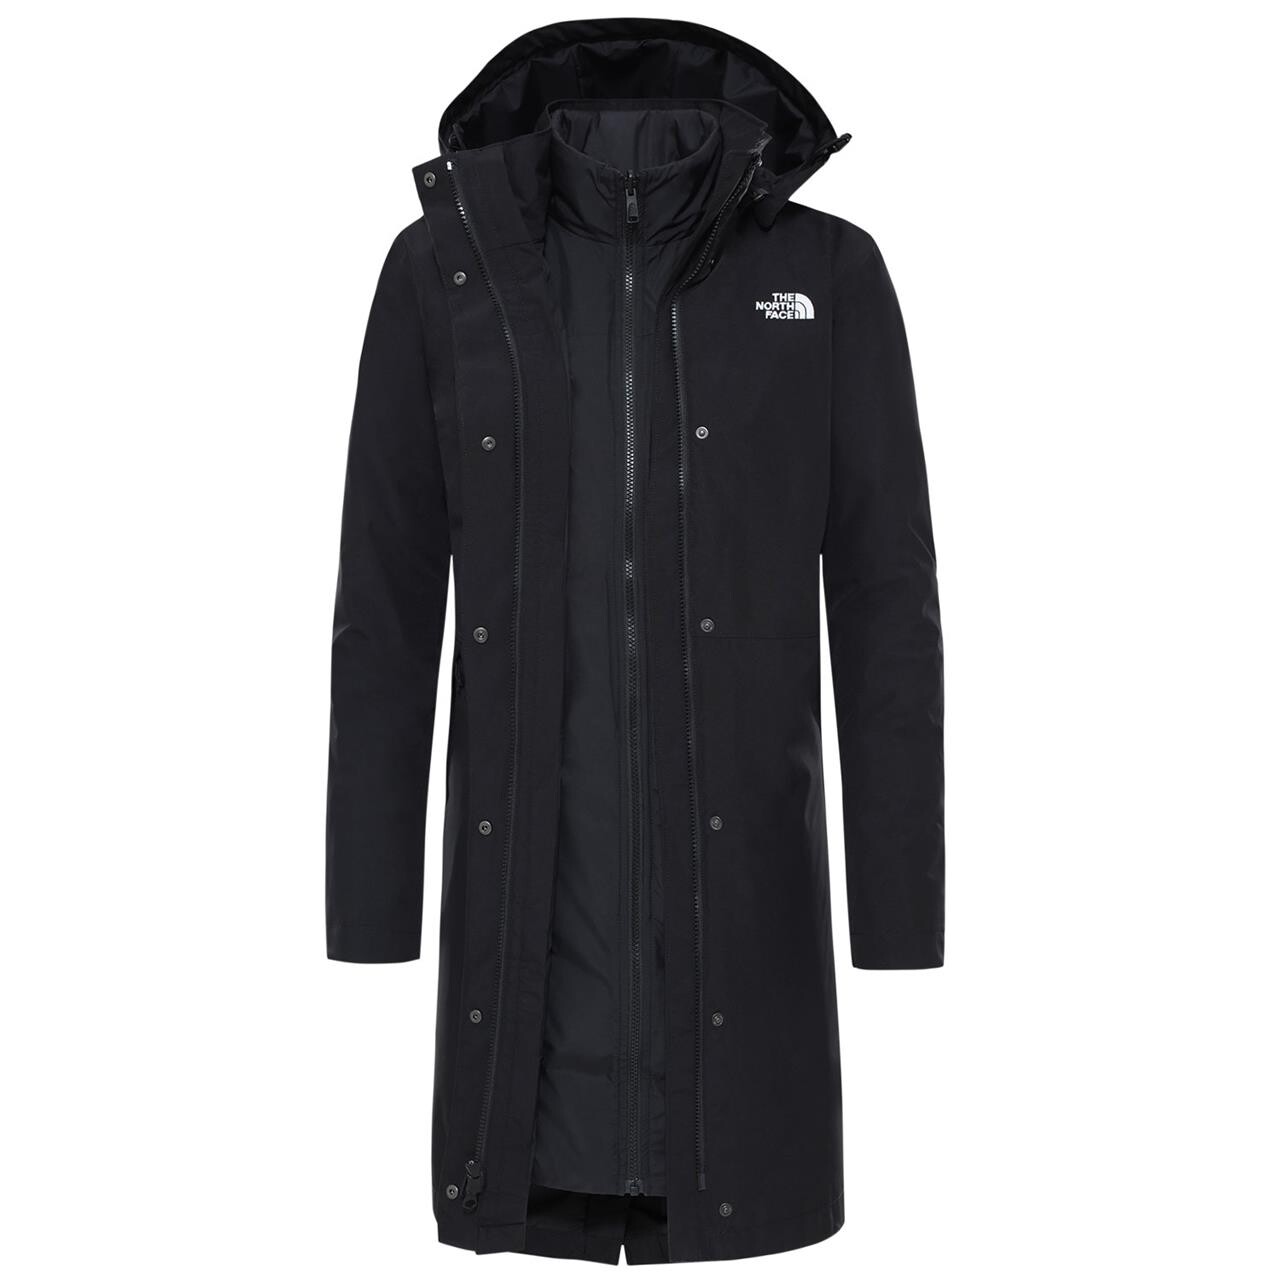 The North Womens Recycled Suzanne Triclimate Jacket